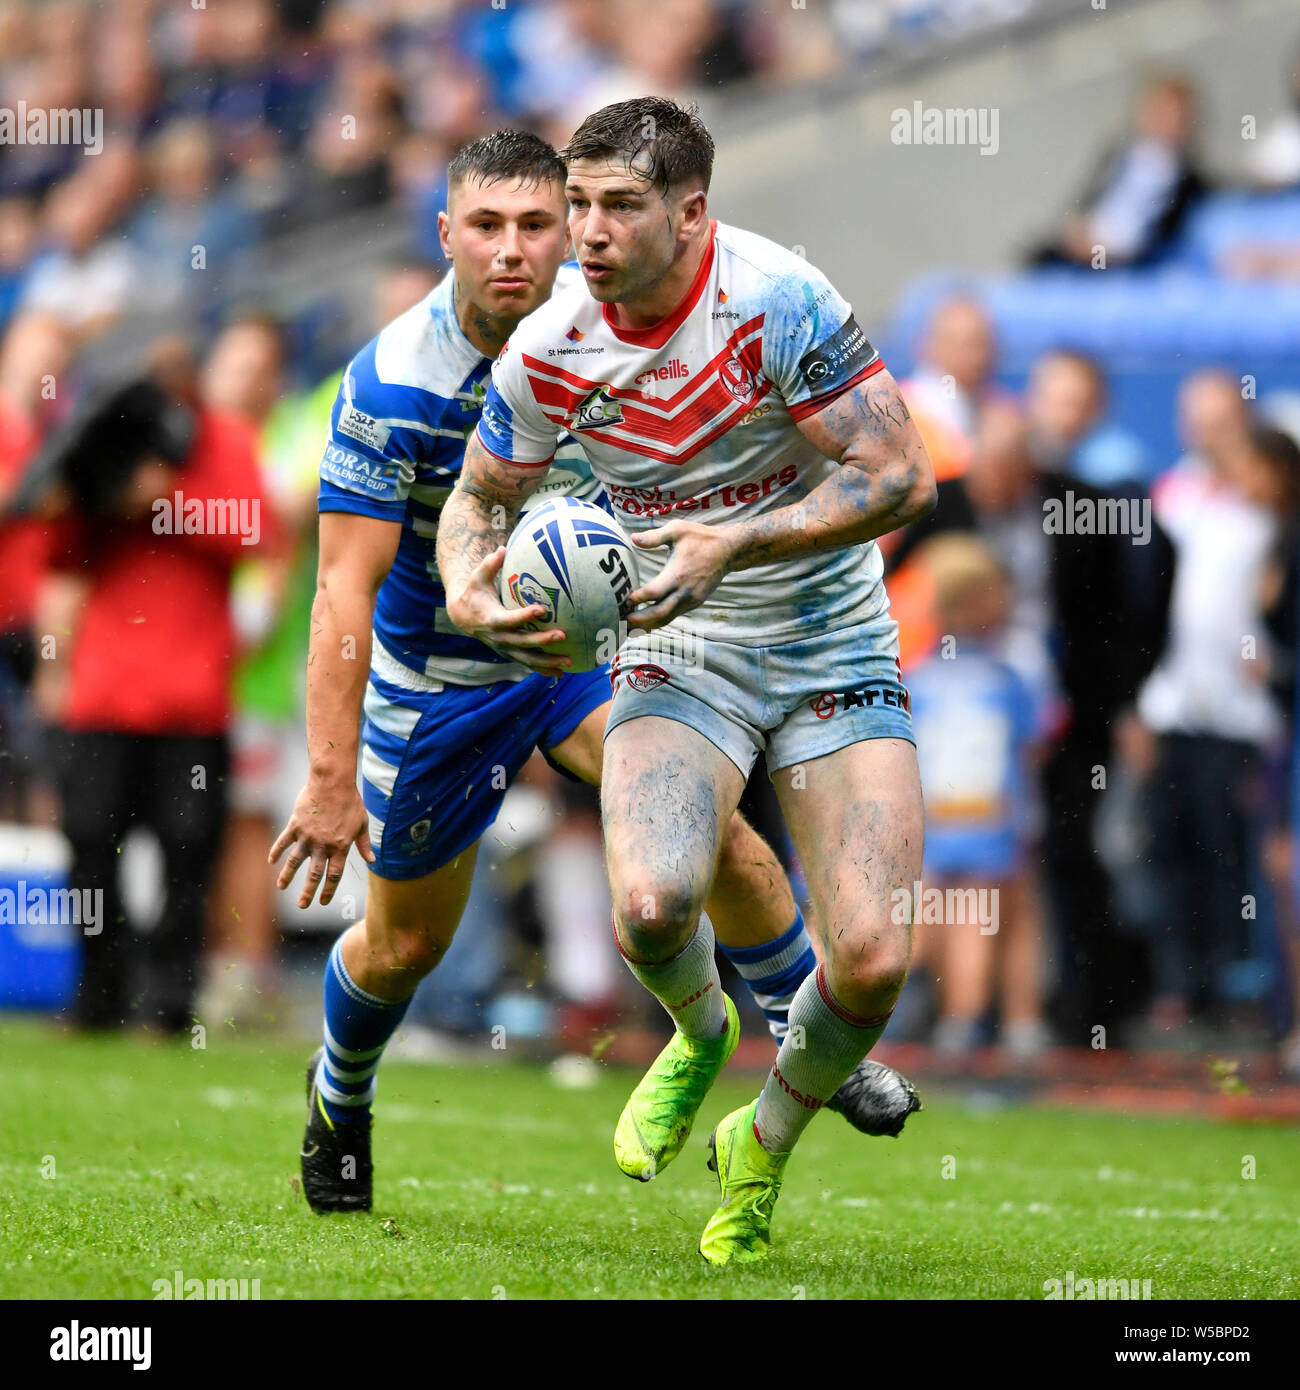 Bolton, UK. 27th July, 2019. Coral Challenge Cup Semi Final St Helens versus Halifax; Mark Percival of St Helens breaks into space after leaving the Halifax RLFC defender behind Credit: Action Plus Sports Images/Alamy Live News Stock Photo